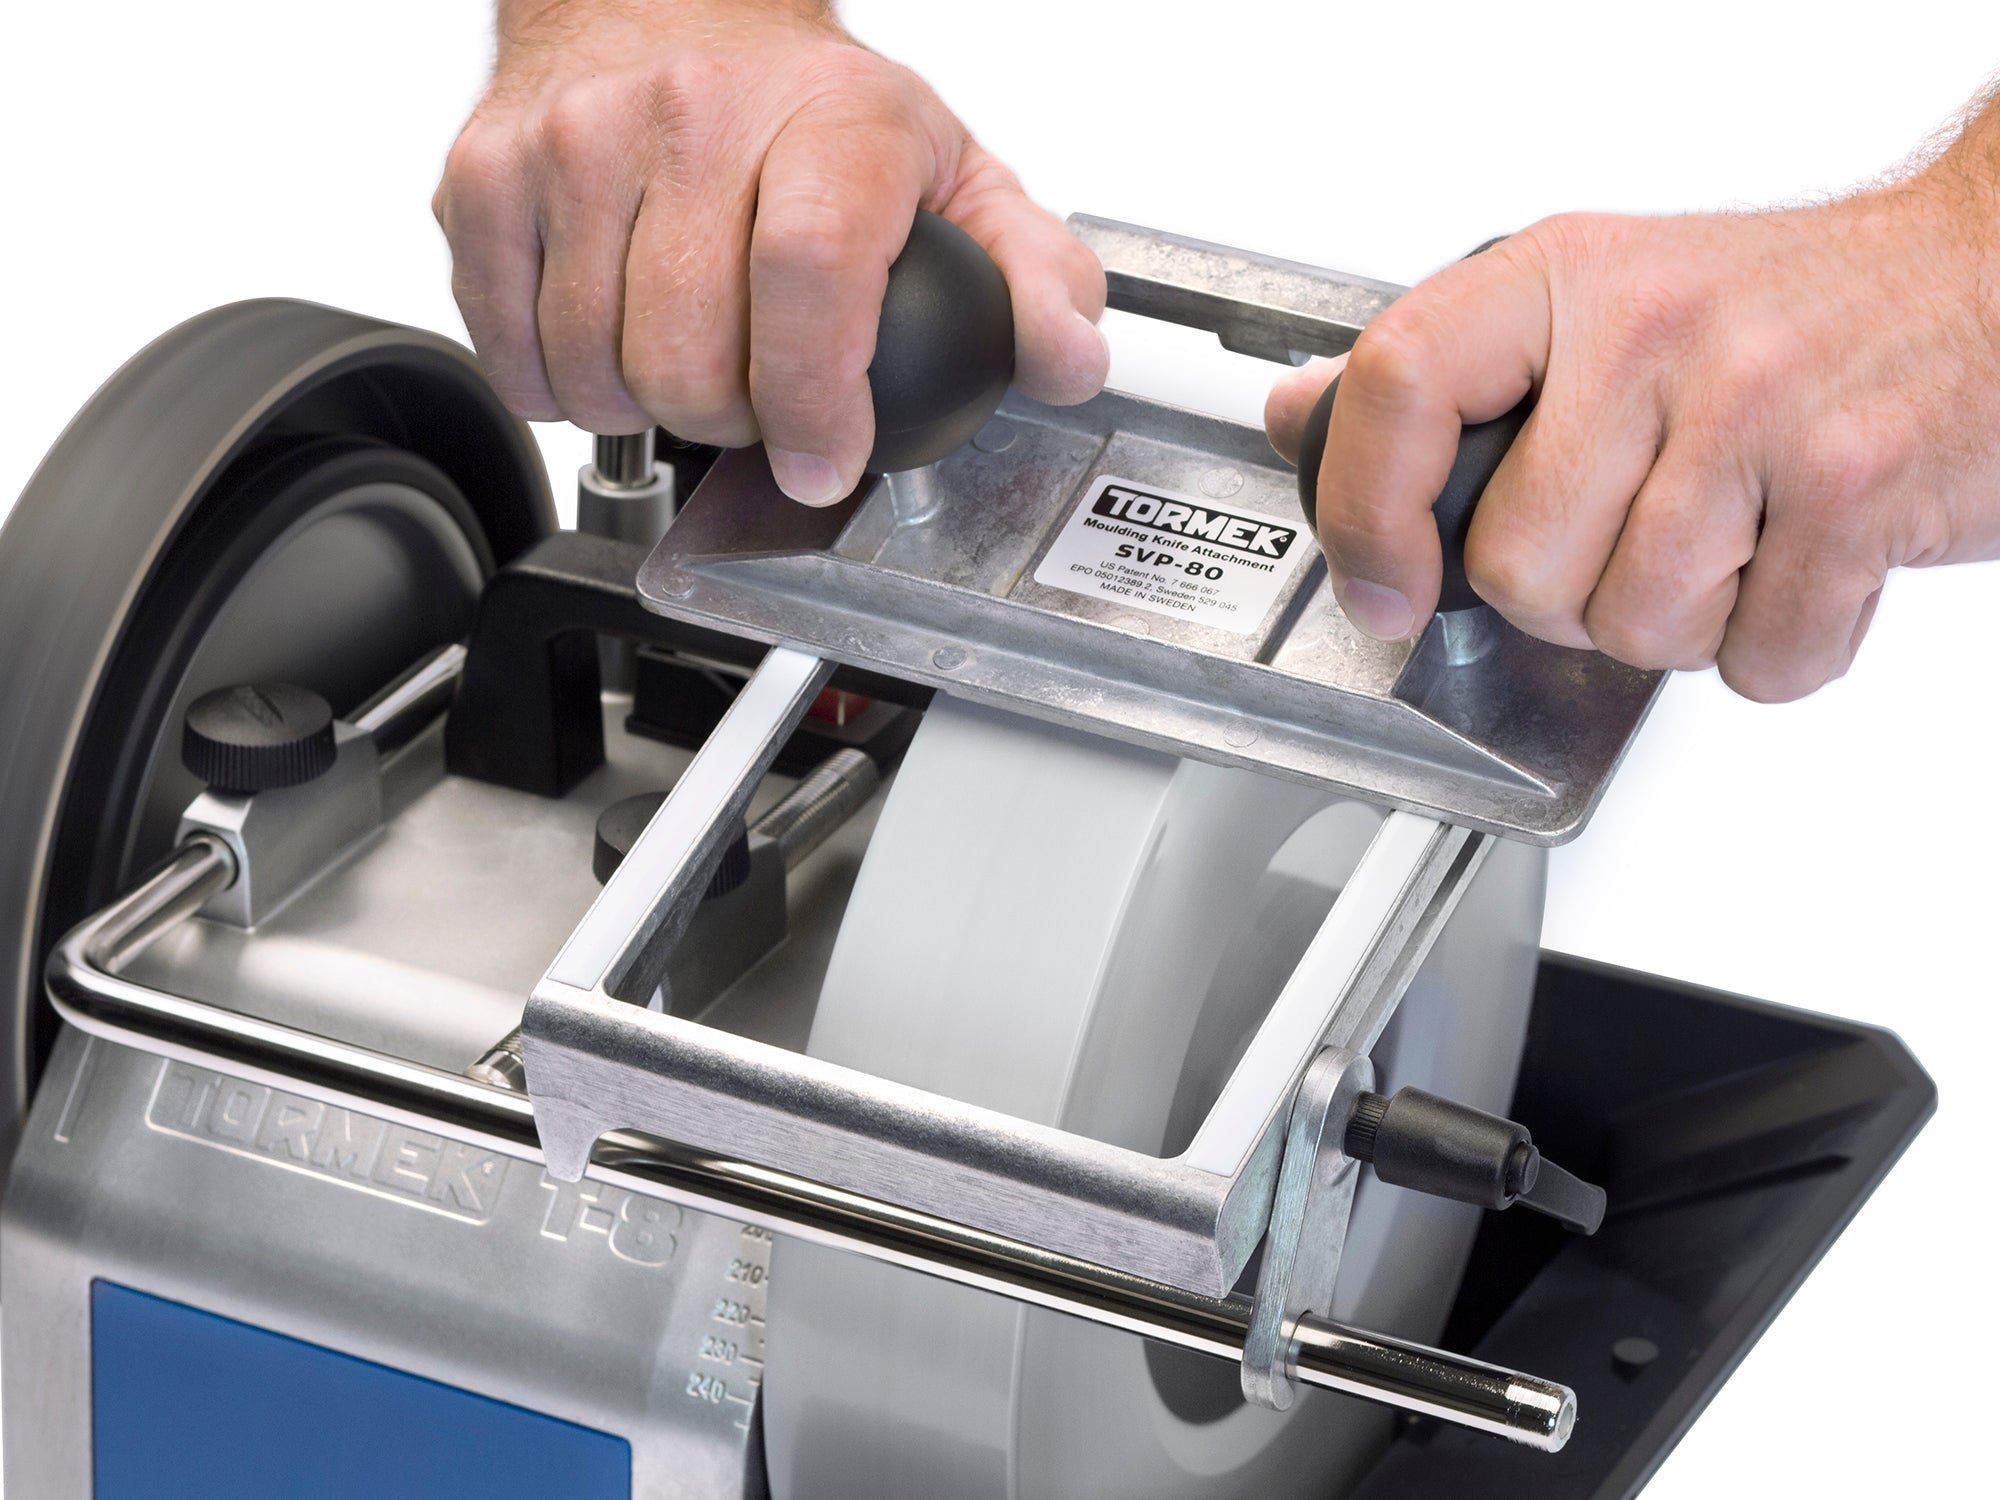 Sharpen thin and flexible knives with the Tormek Knife Jig SVM-140 